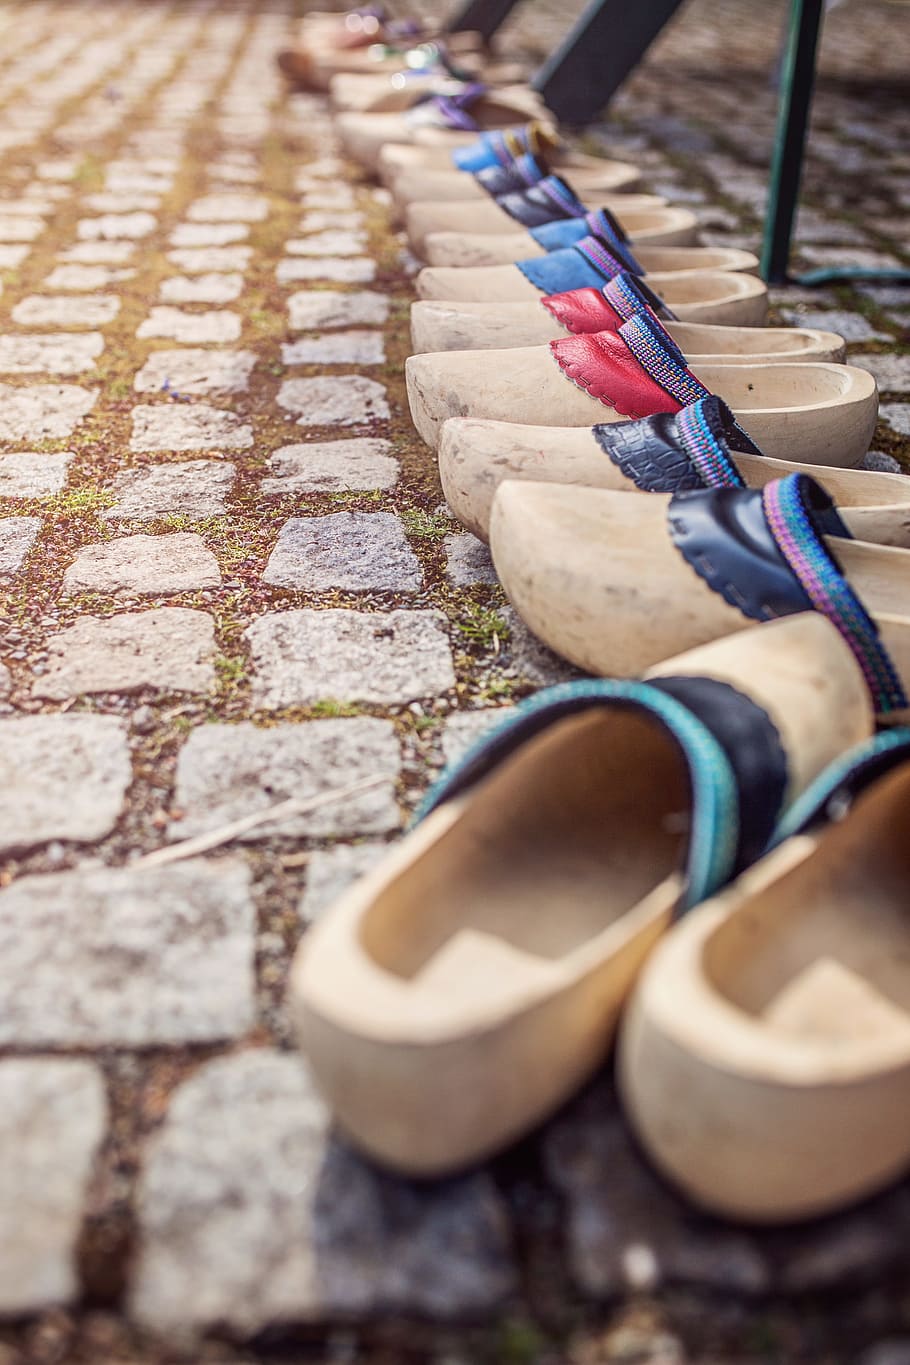 wooden shoes, holland, netherlands, shoes, wood, colorful, many, color, tradition, traditionally